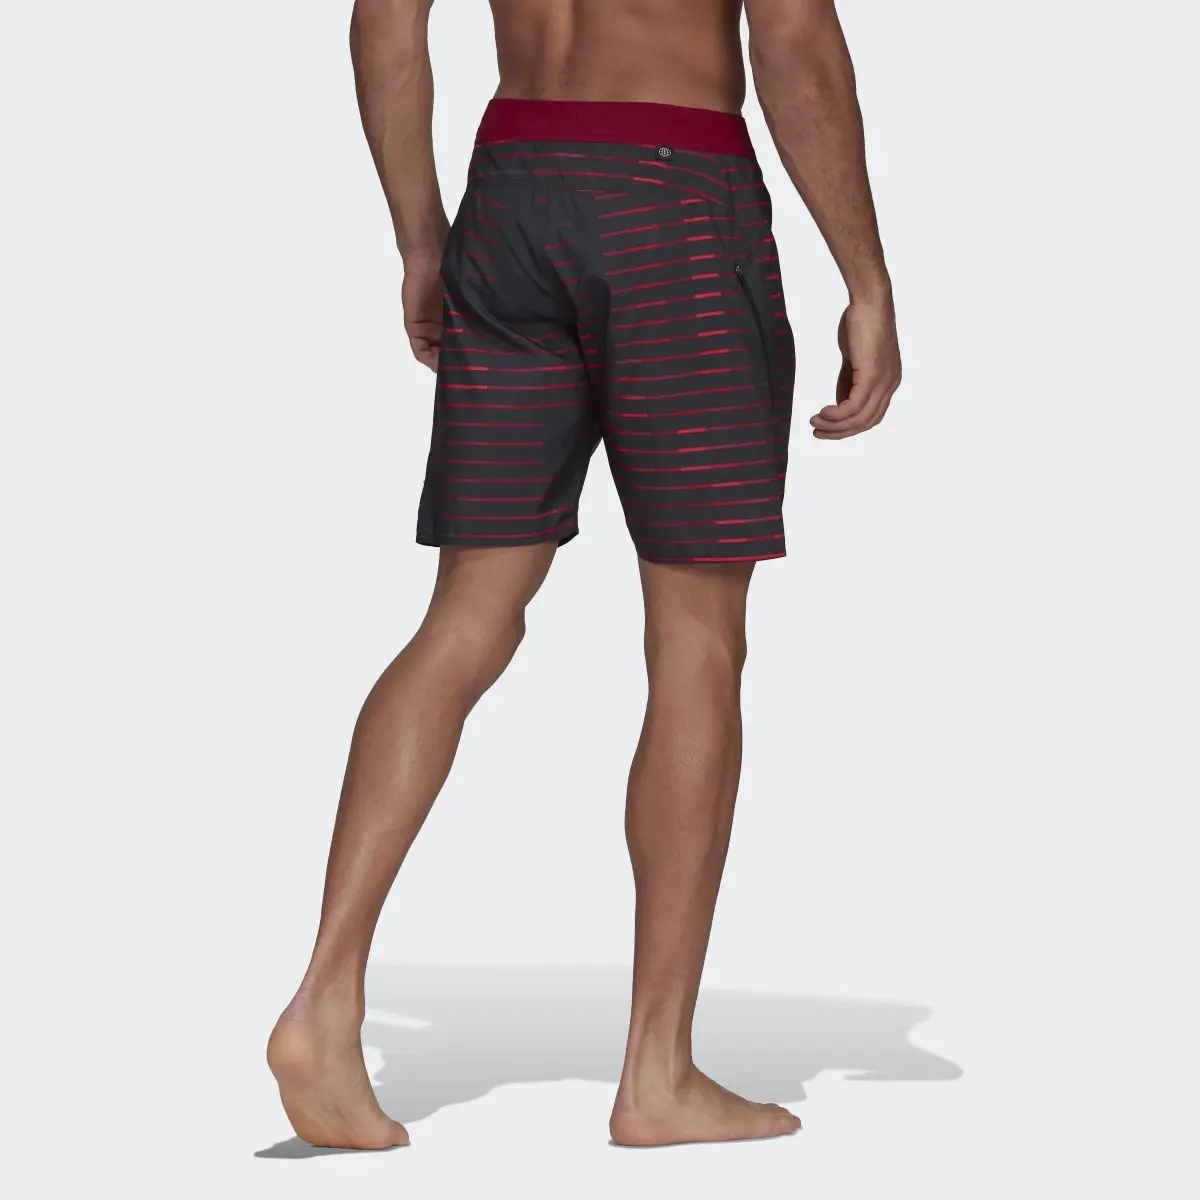 Adidas Classic Length Melbourne Graphic Board Shorts. 2